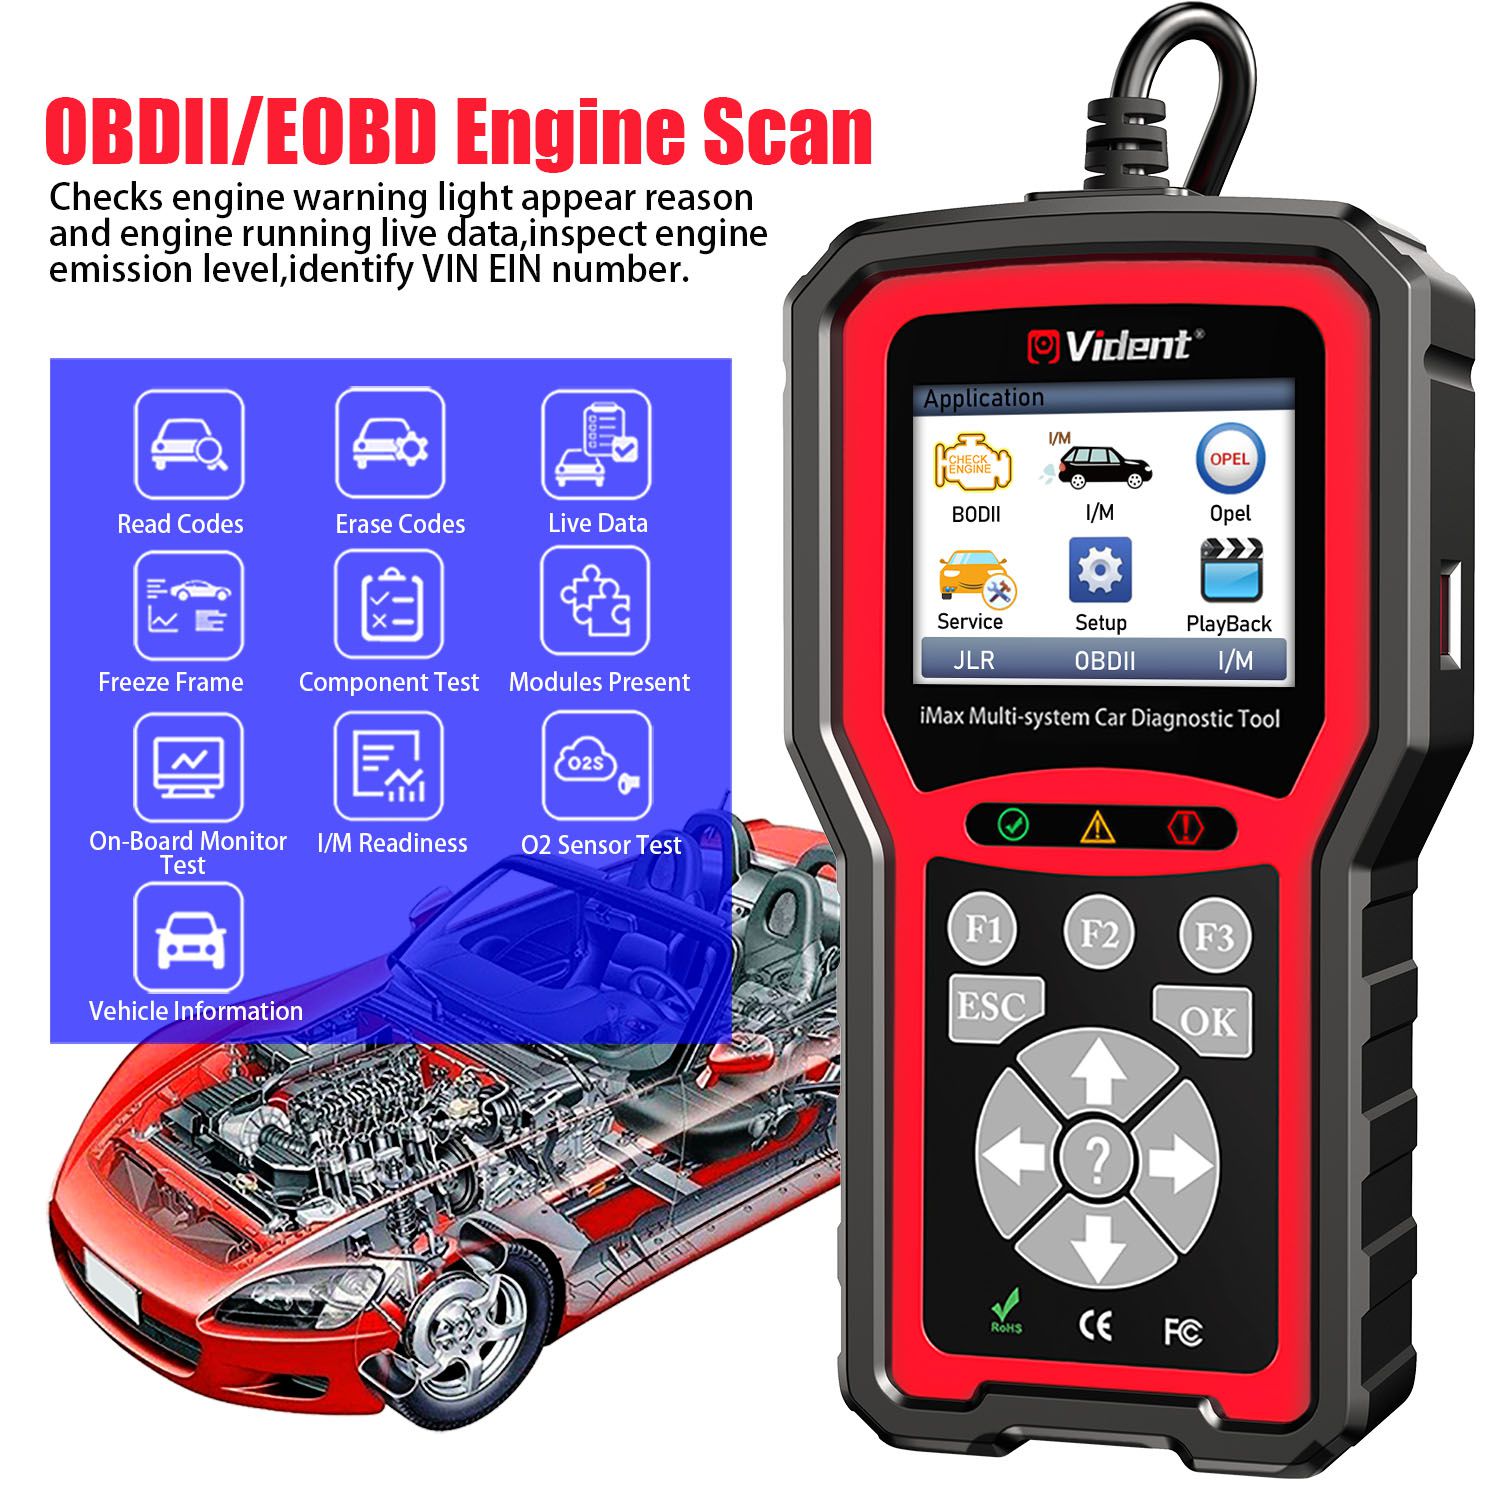 VIDENT iMax4305 OPEL Full System Car Diagnostic Tool for VAUXHALL OPEL Rover Support Reset/OBDII Diagnostic/Service